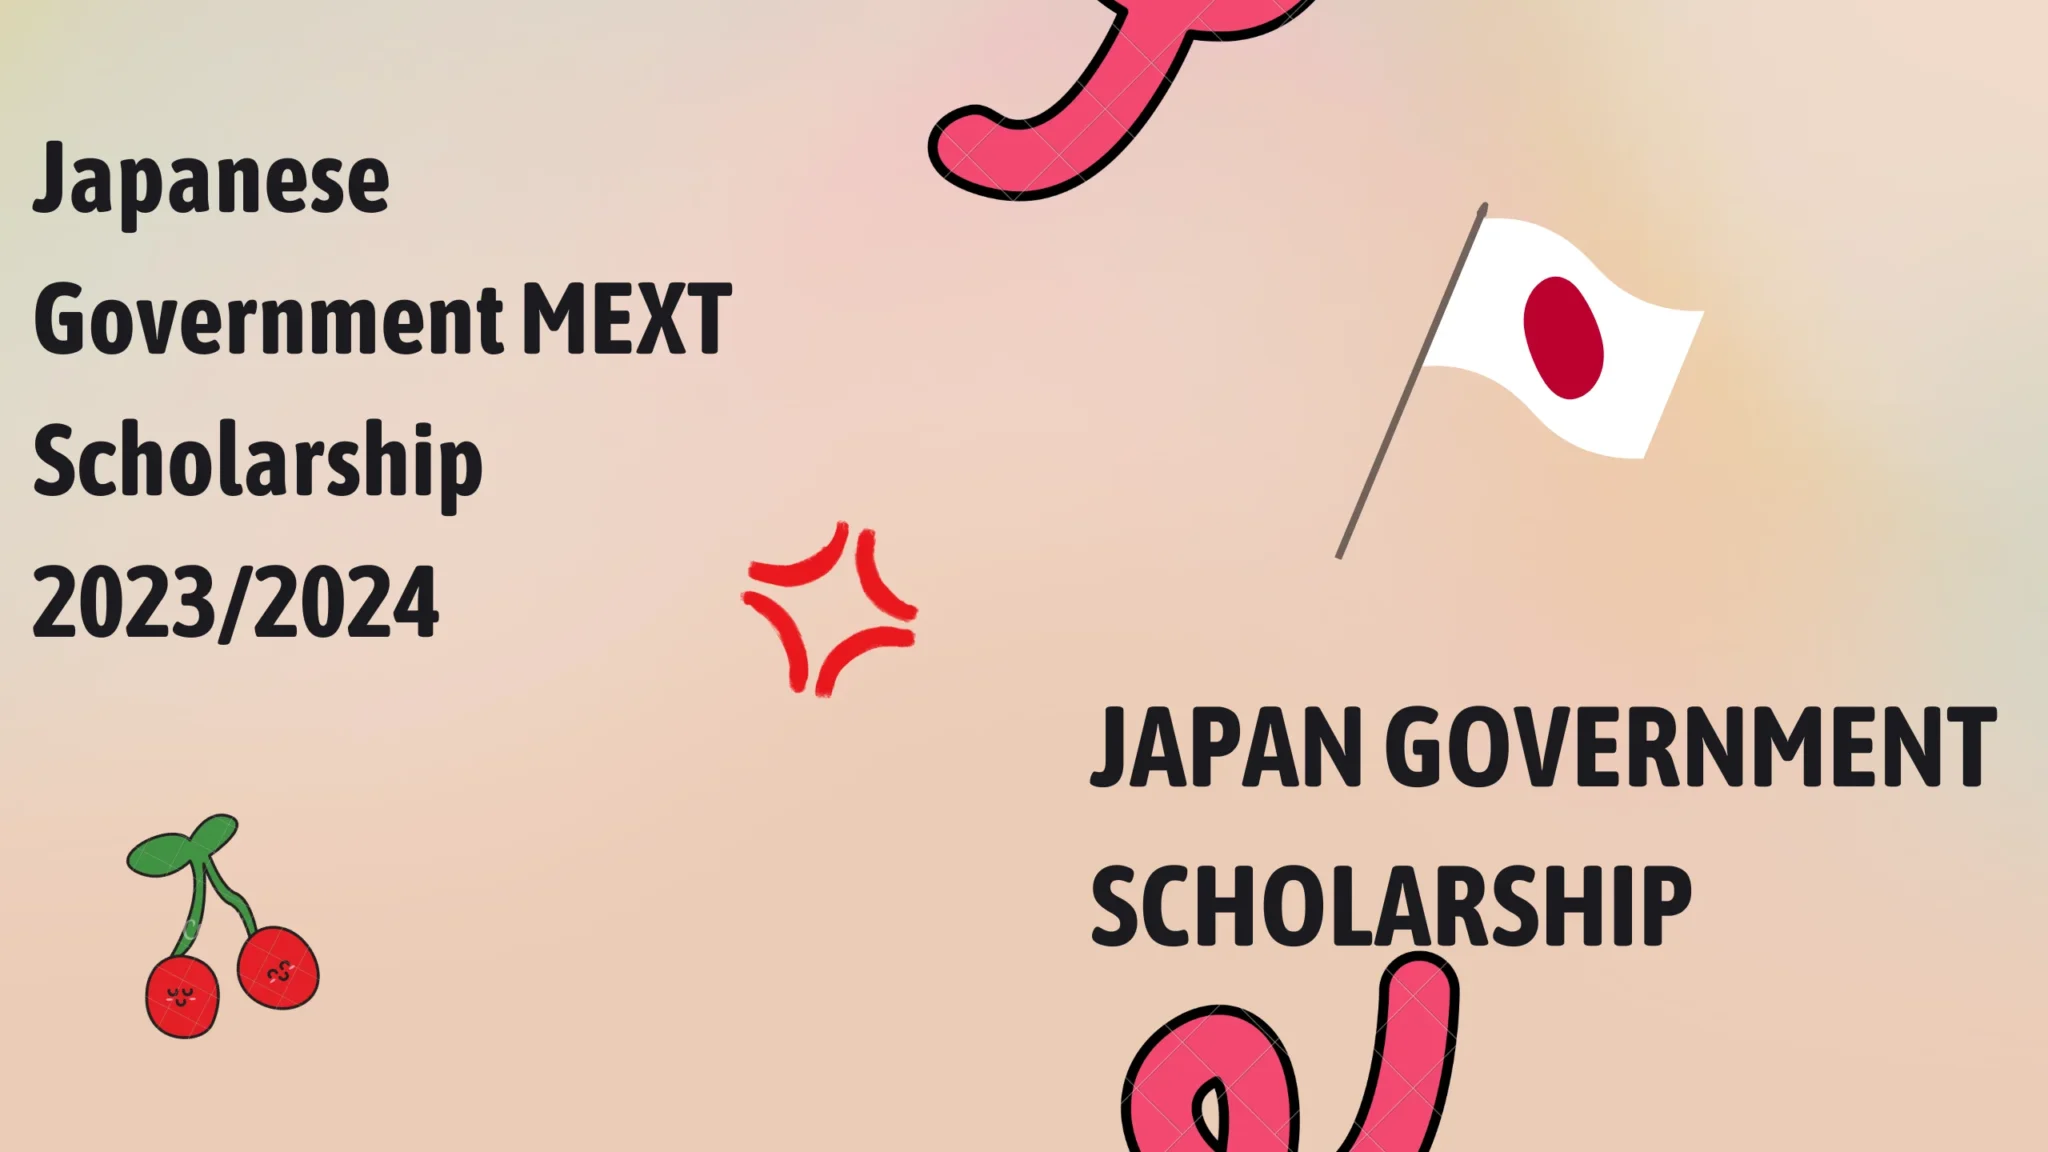 Japan Government scholarship    How To Apply | Japan Embassies And Consulates For MEXT Scholarship 2023/2024